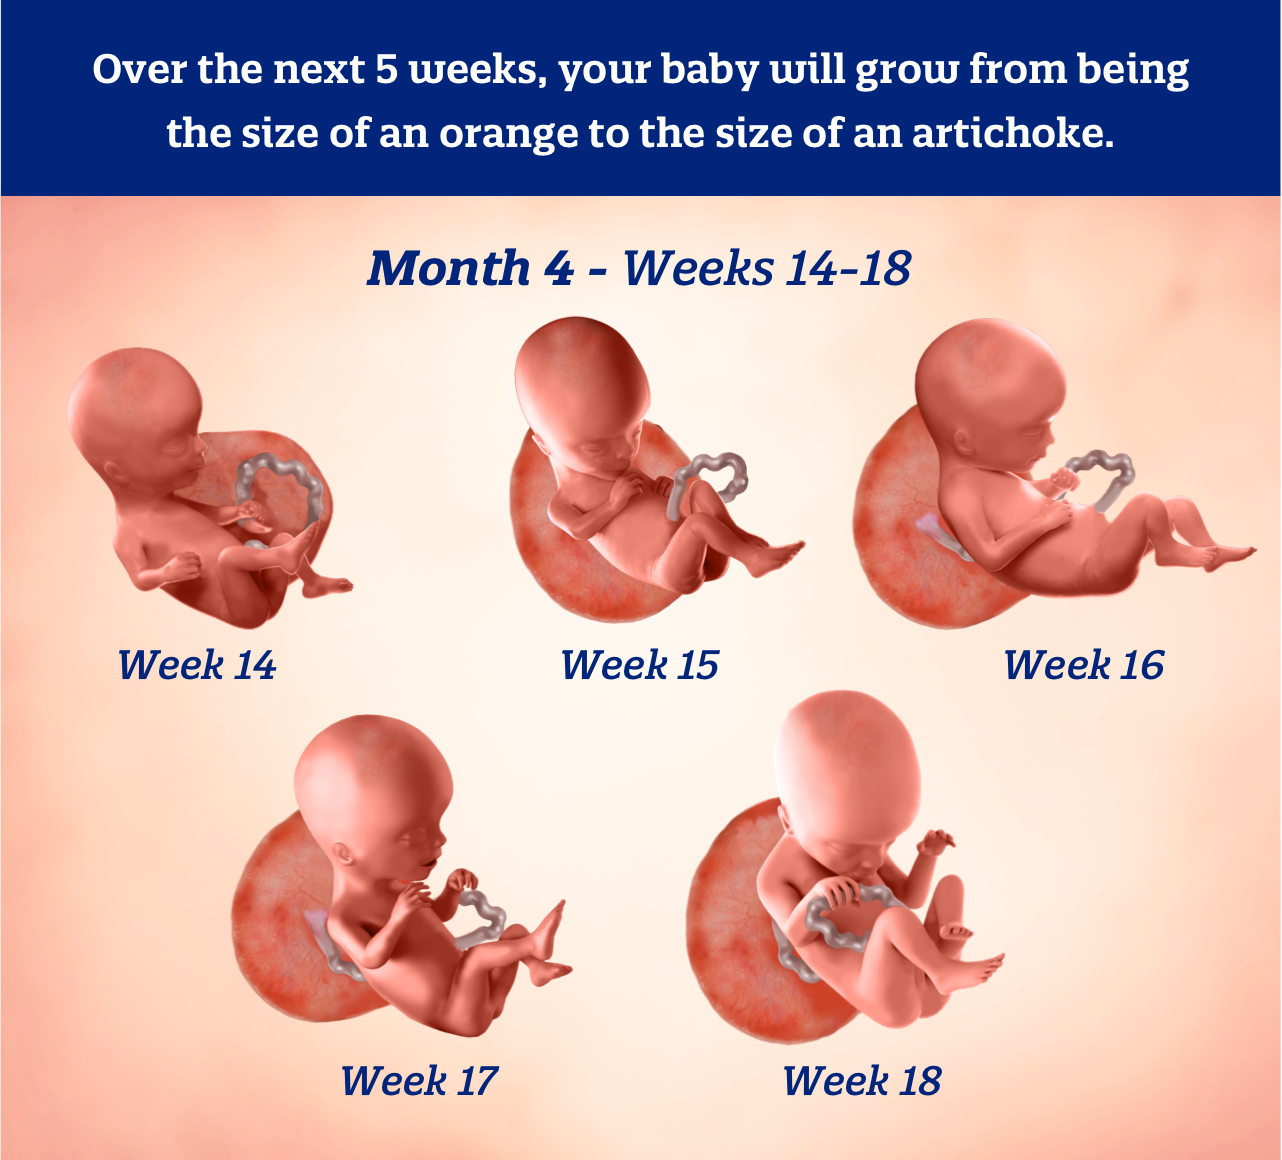 Month 4 weeks 14-18: Over the next 5 weeks, your baby will grow from being the size of an orange to the size of an artichoke.